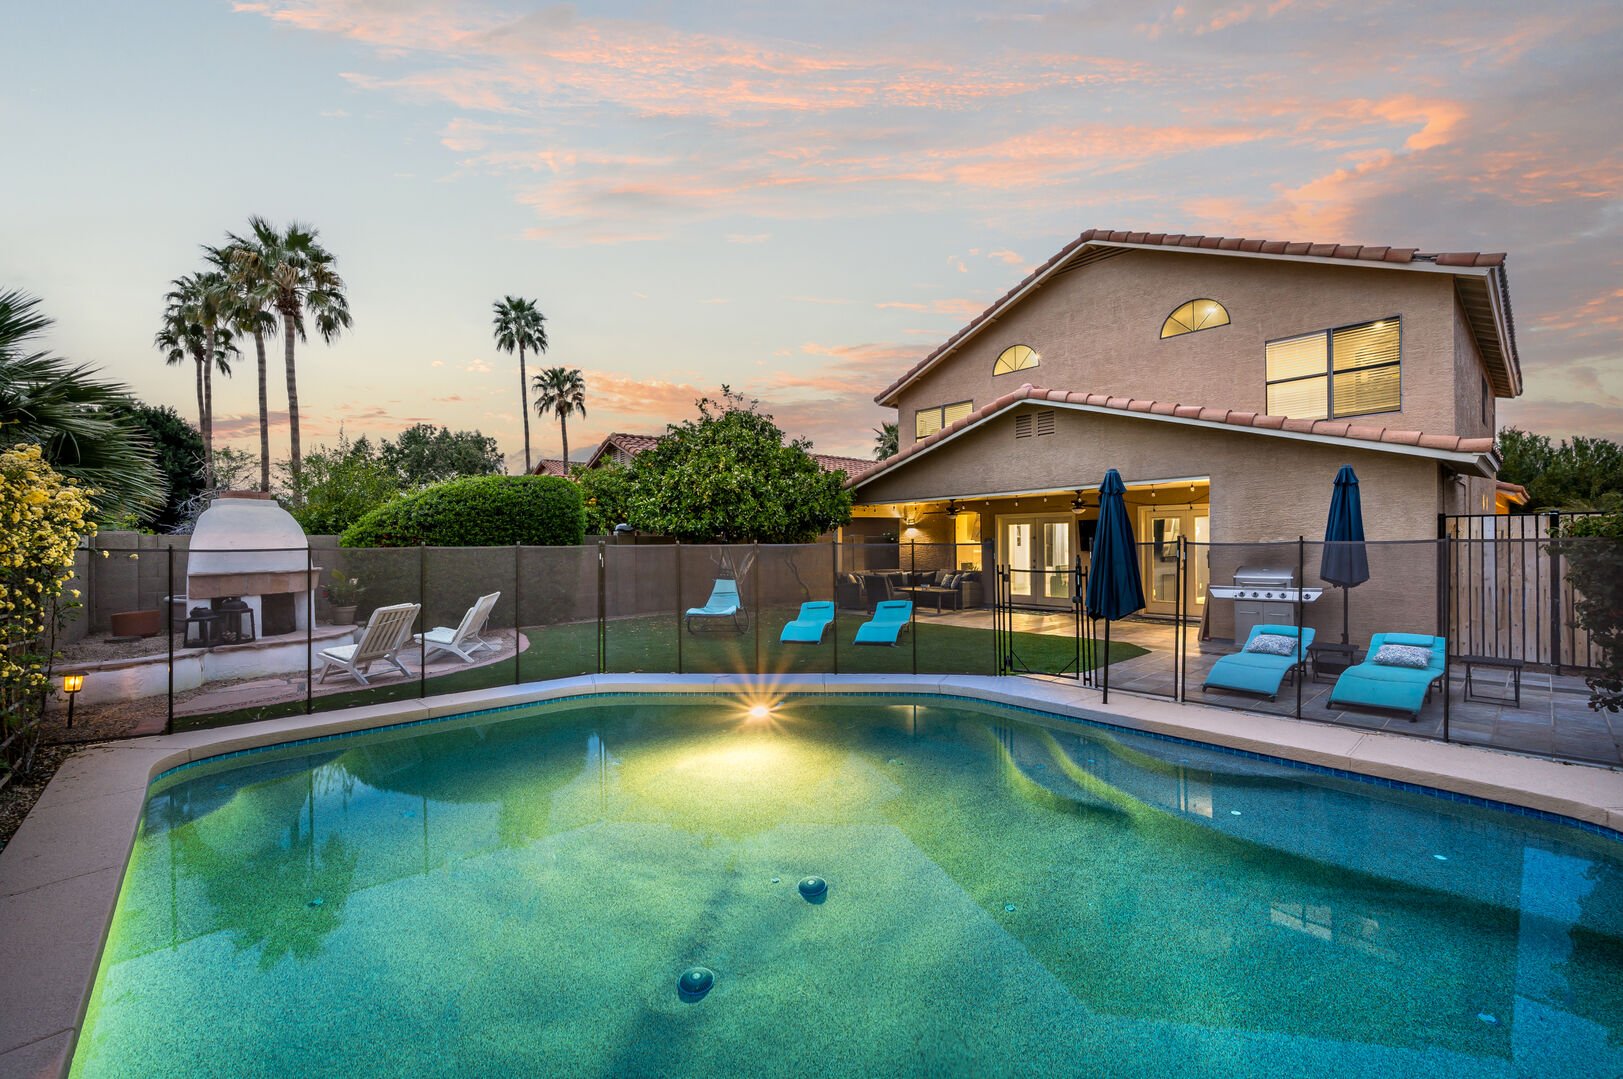 Places to Rent in Scottsdale AZ